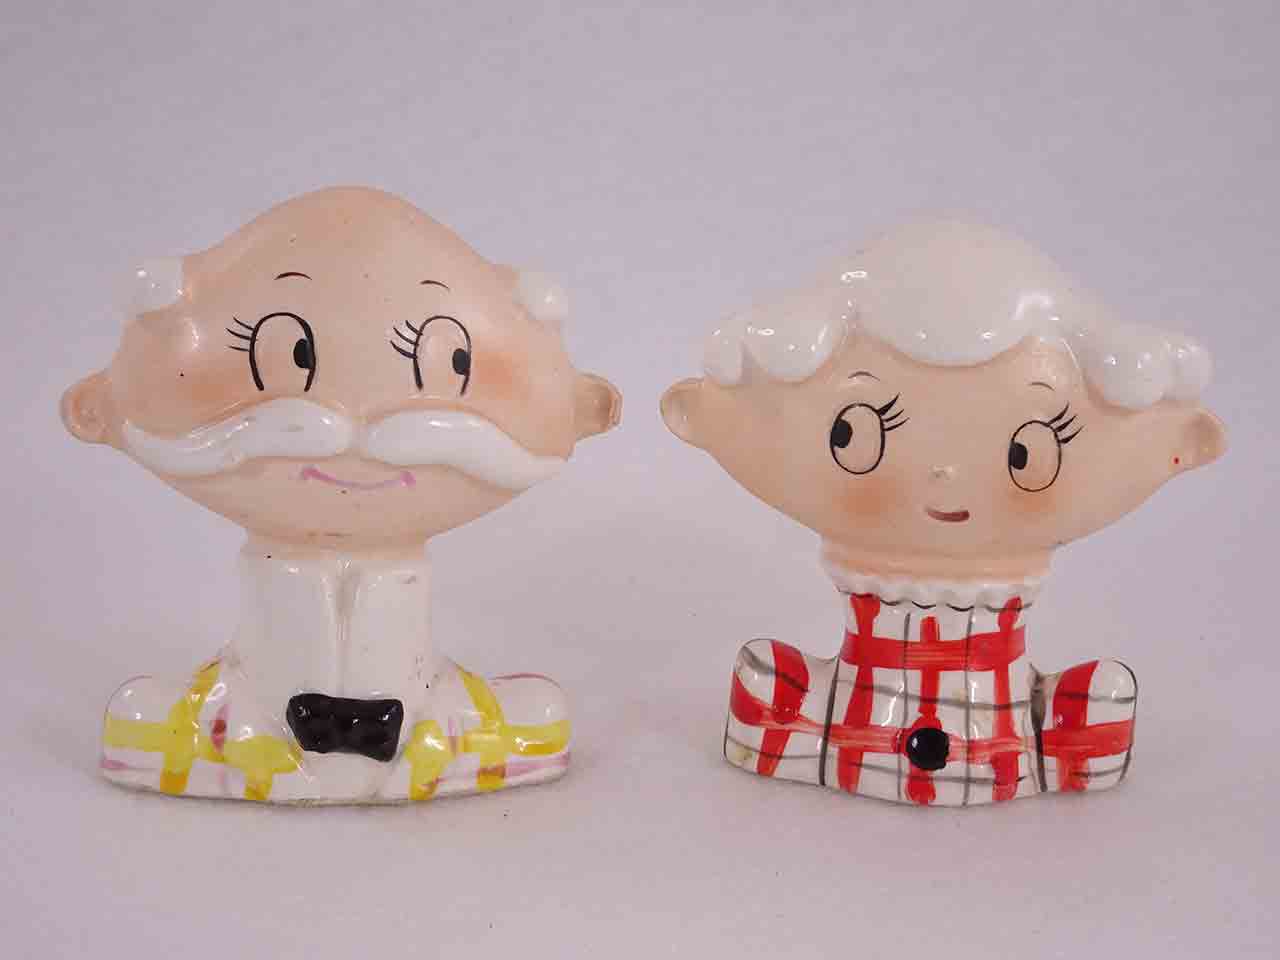 Holt Howard like busts of old couple salt and pepper shakers